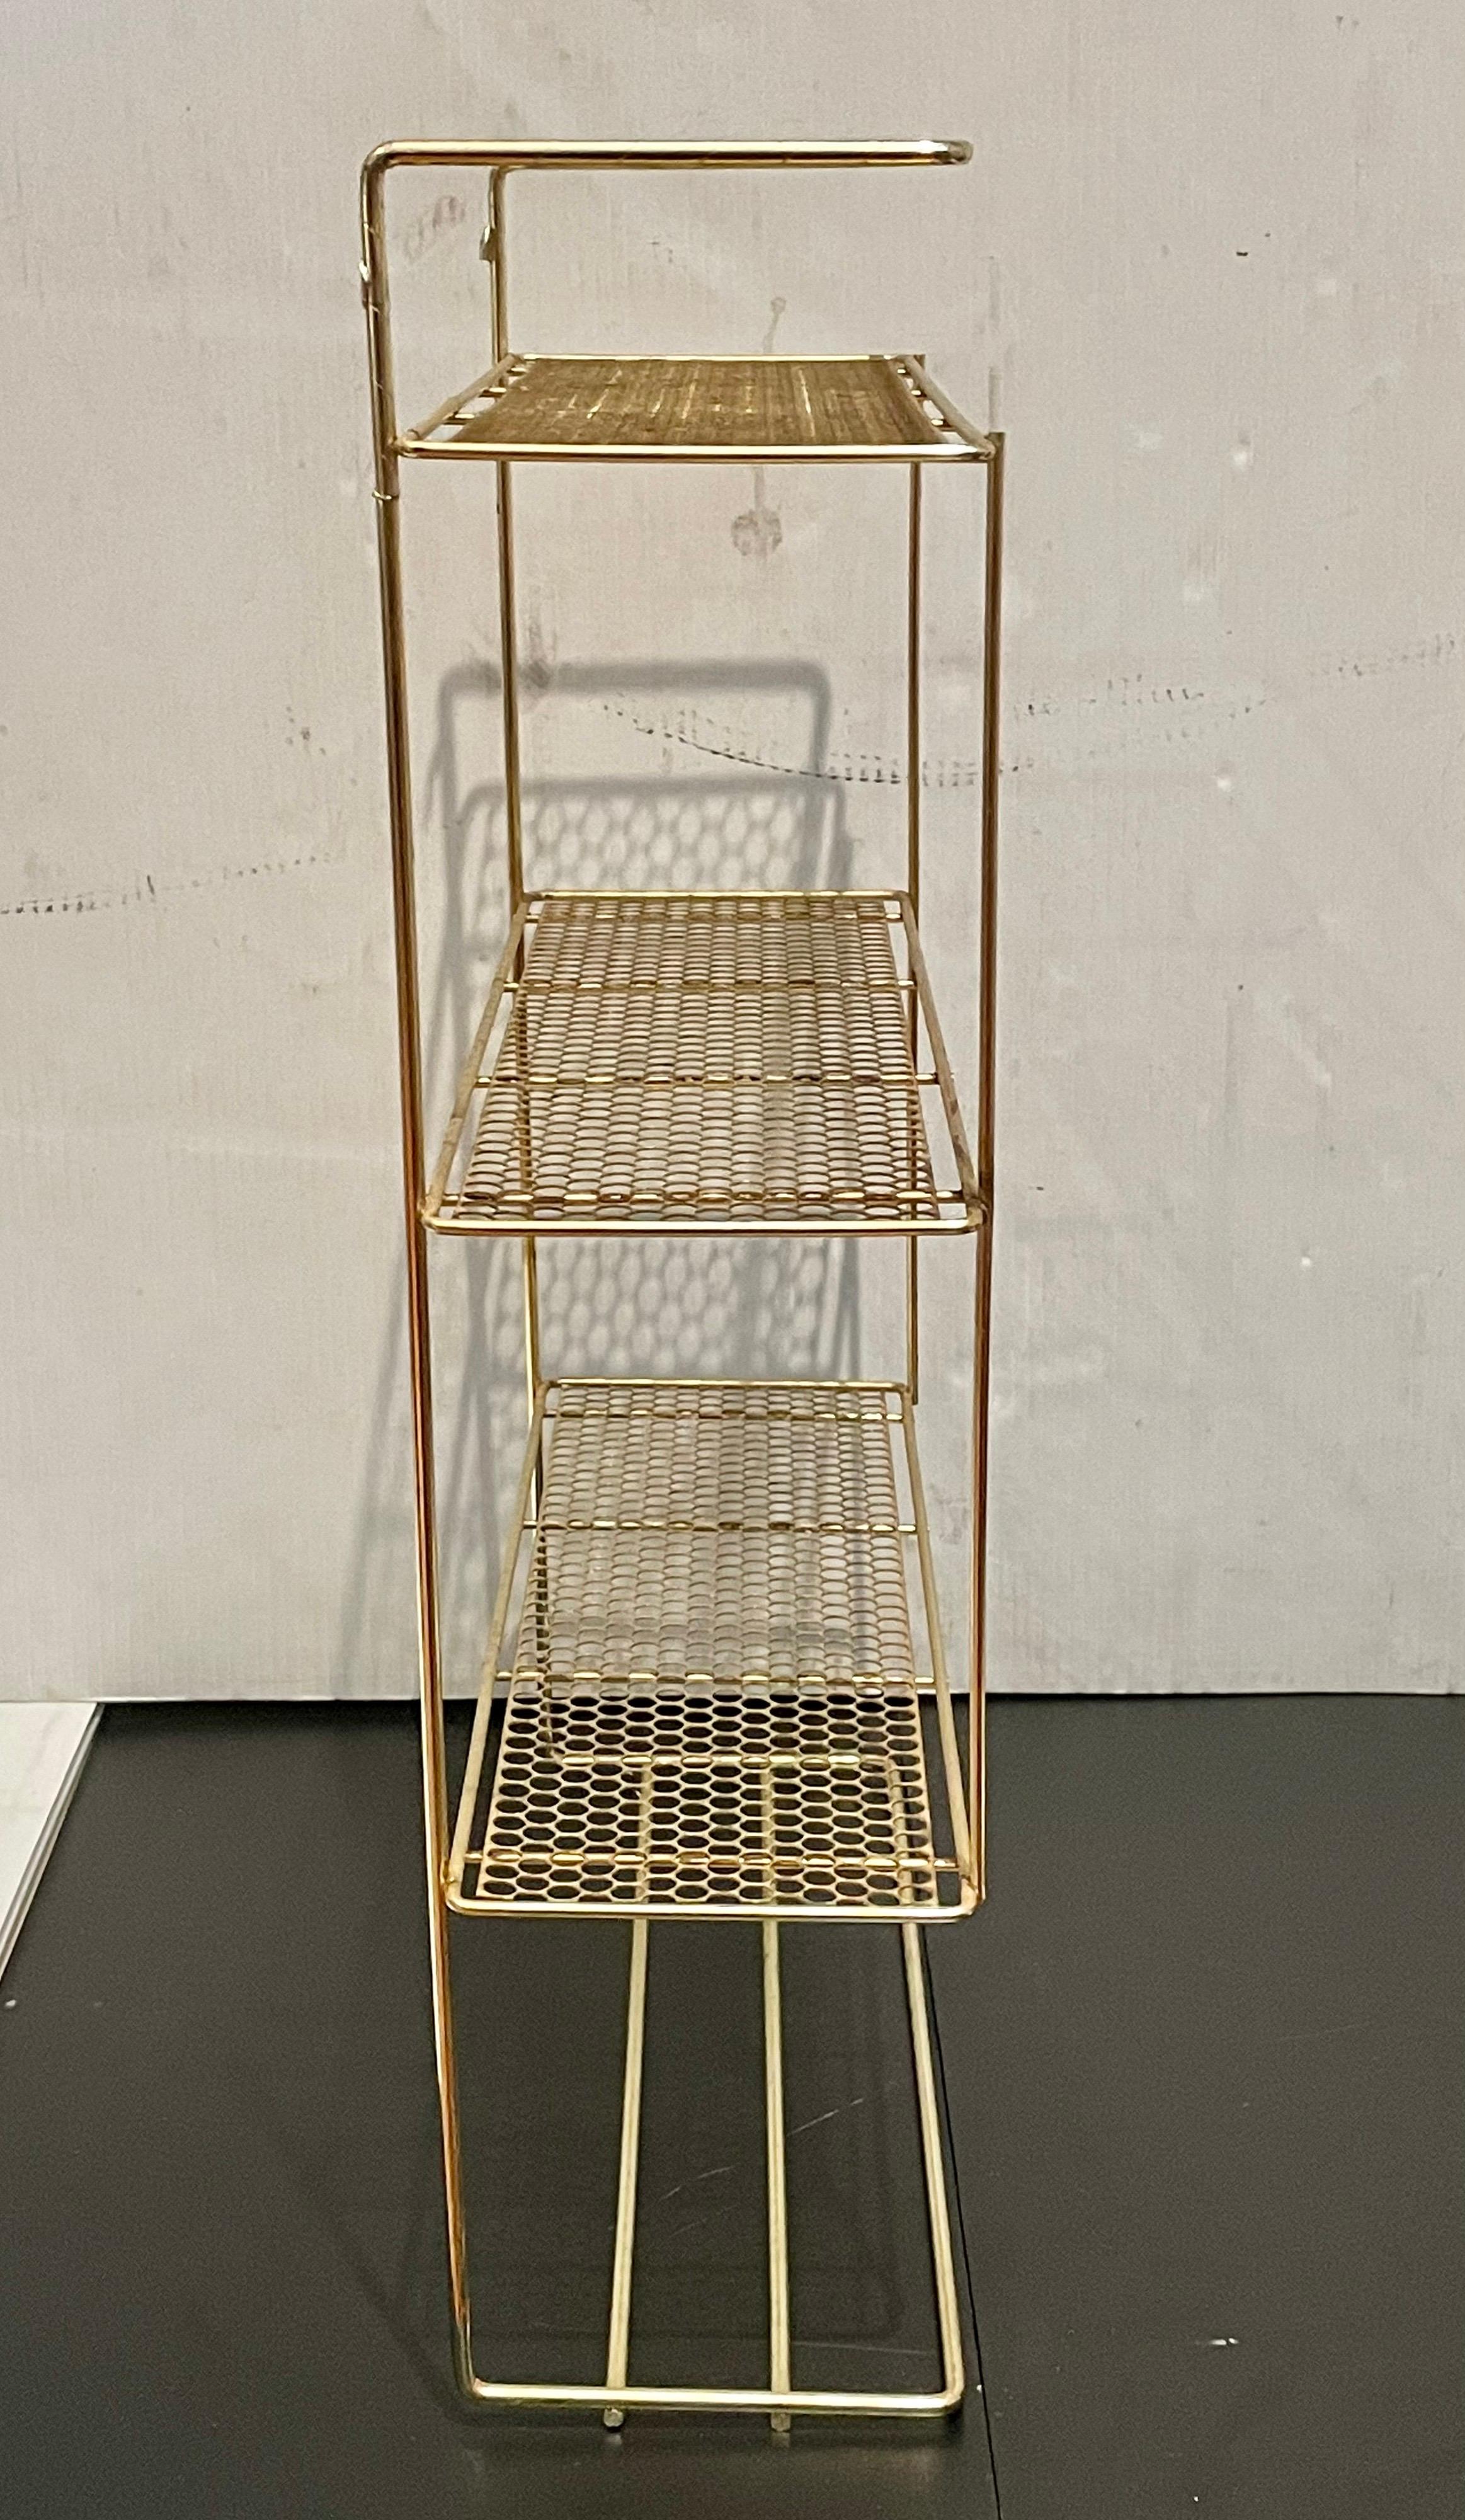 American Richard Galef Wire Perforated Metal Wall Towel Rack in Brass Finish